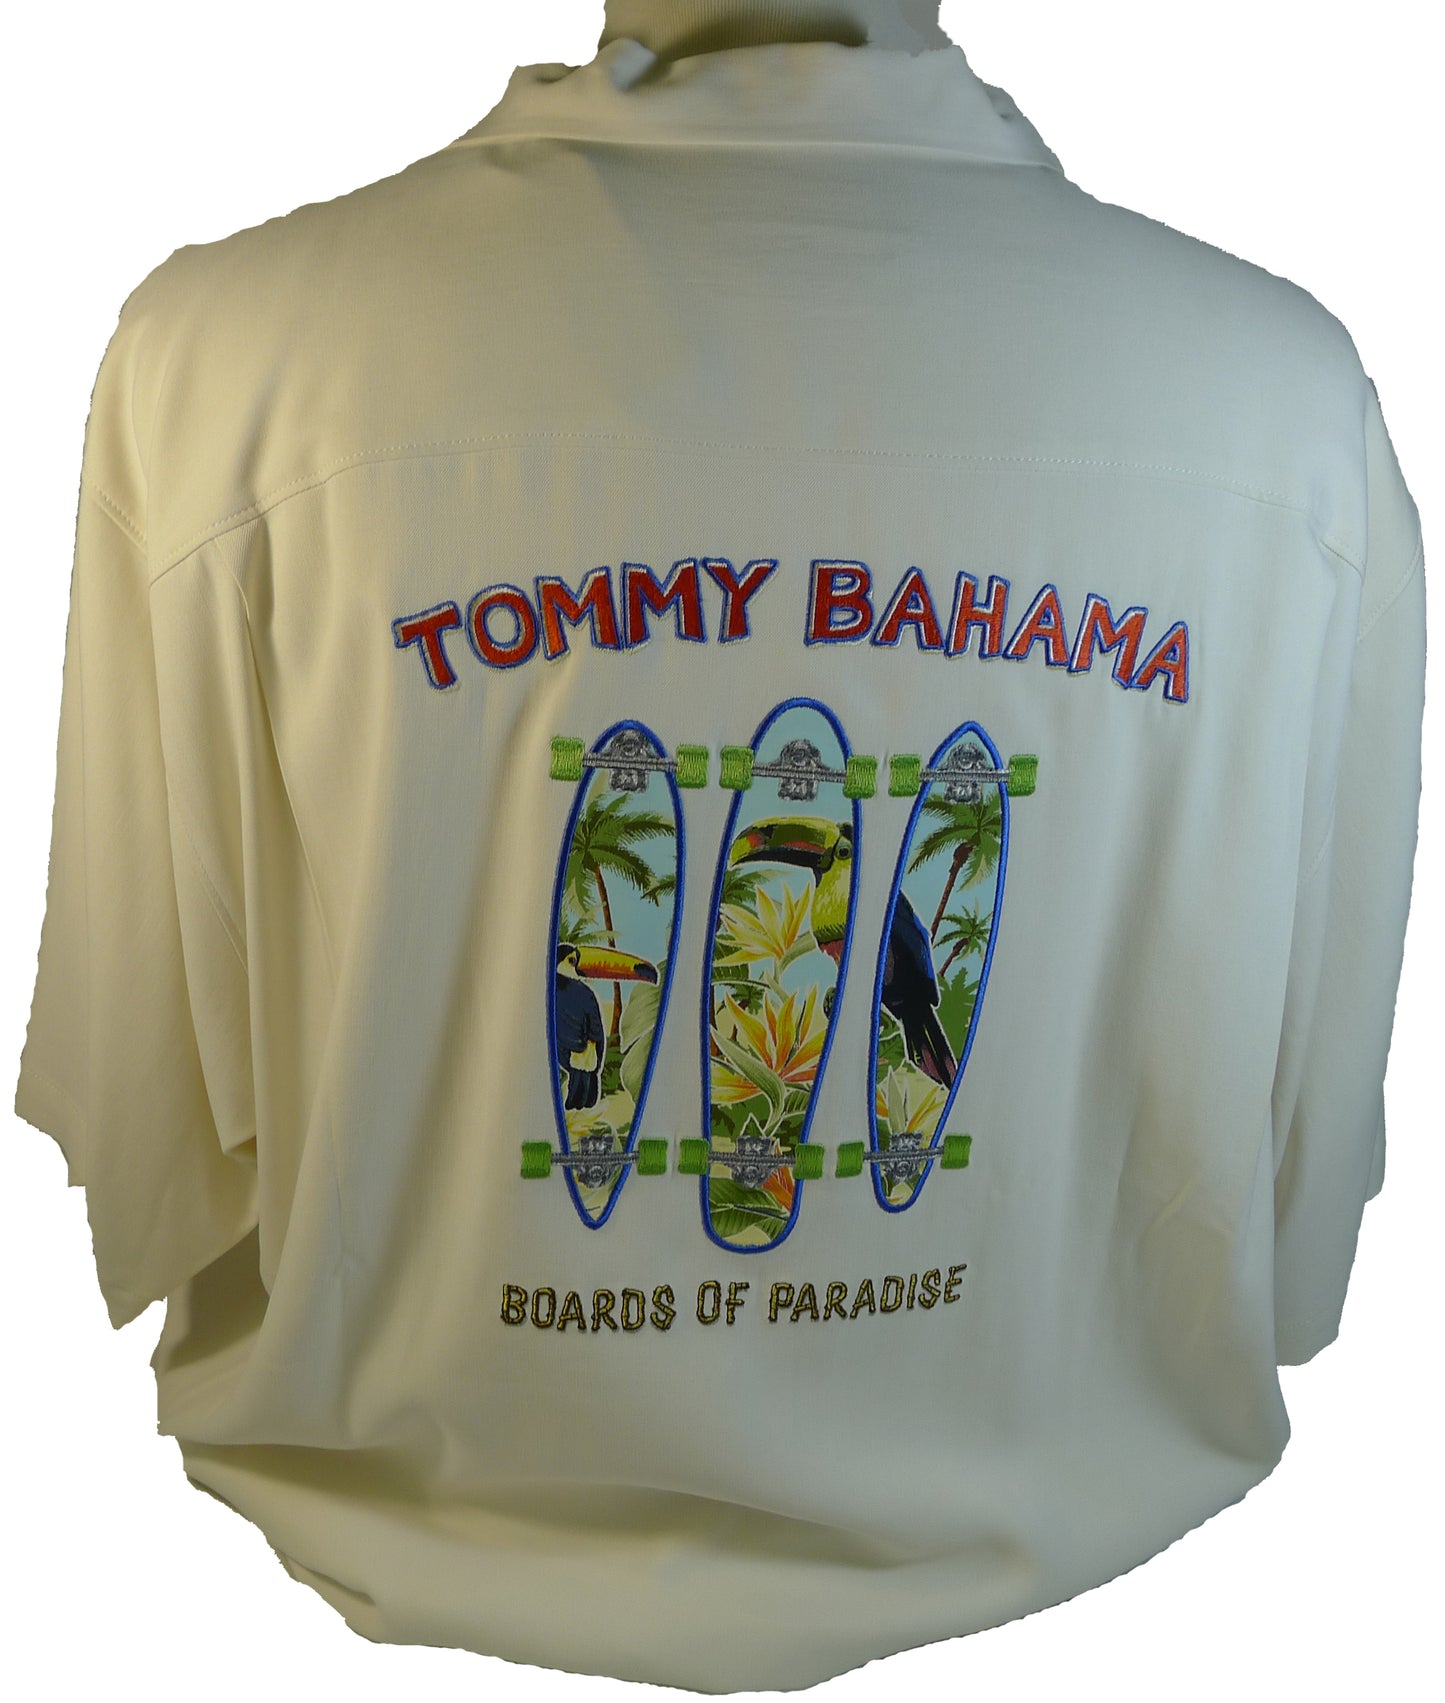 Tommy Bahama Men's Boards of Paradise S/S